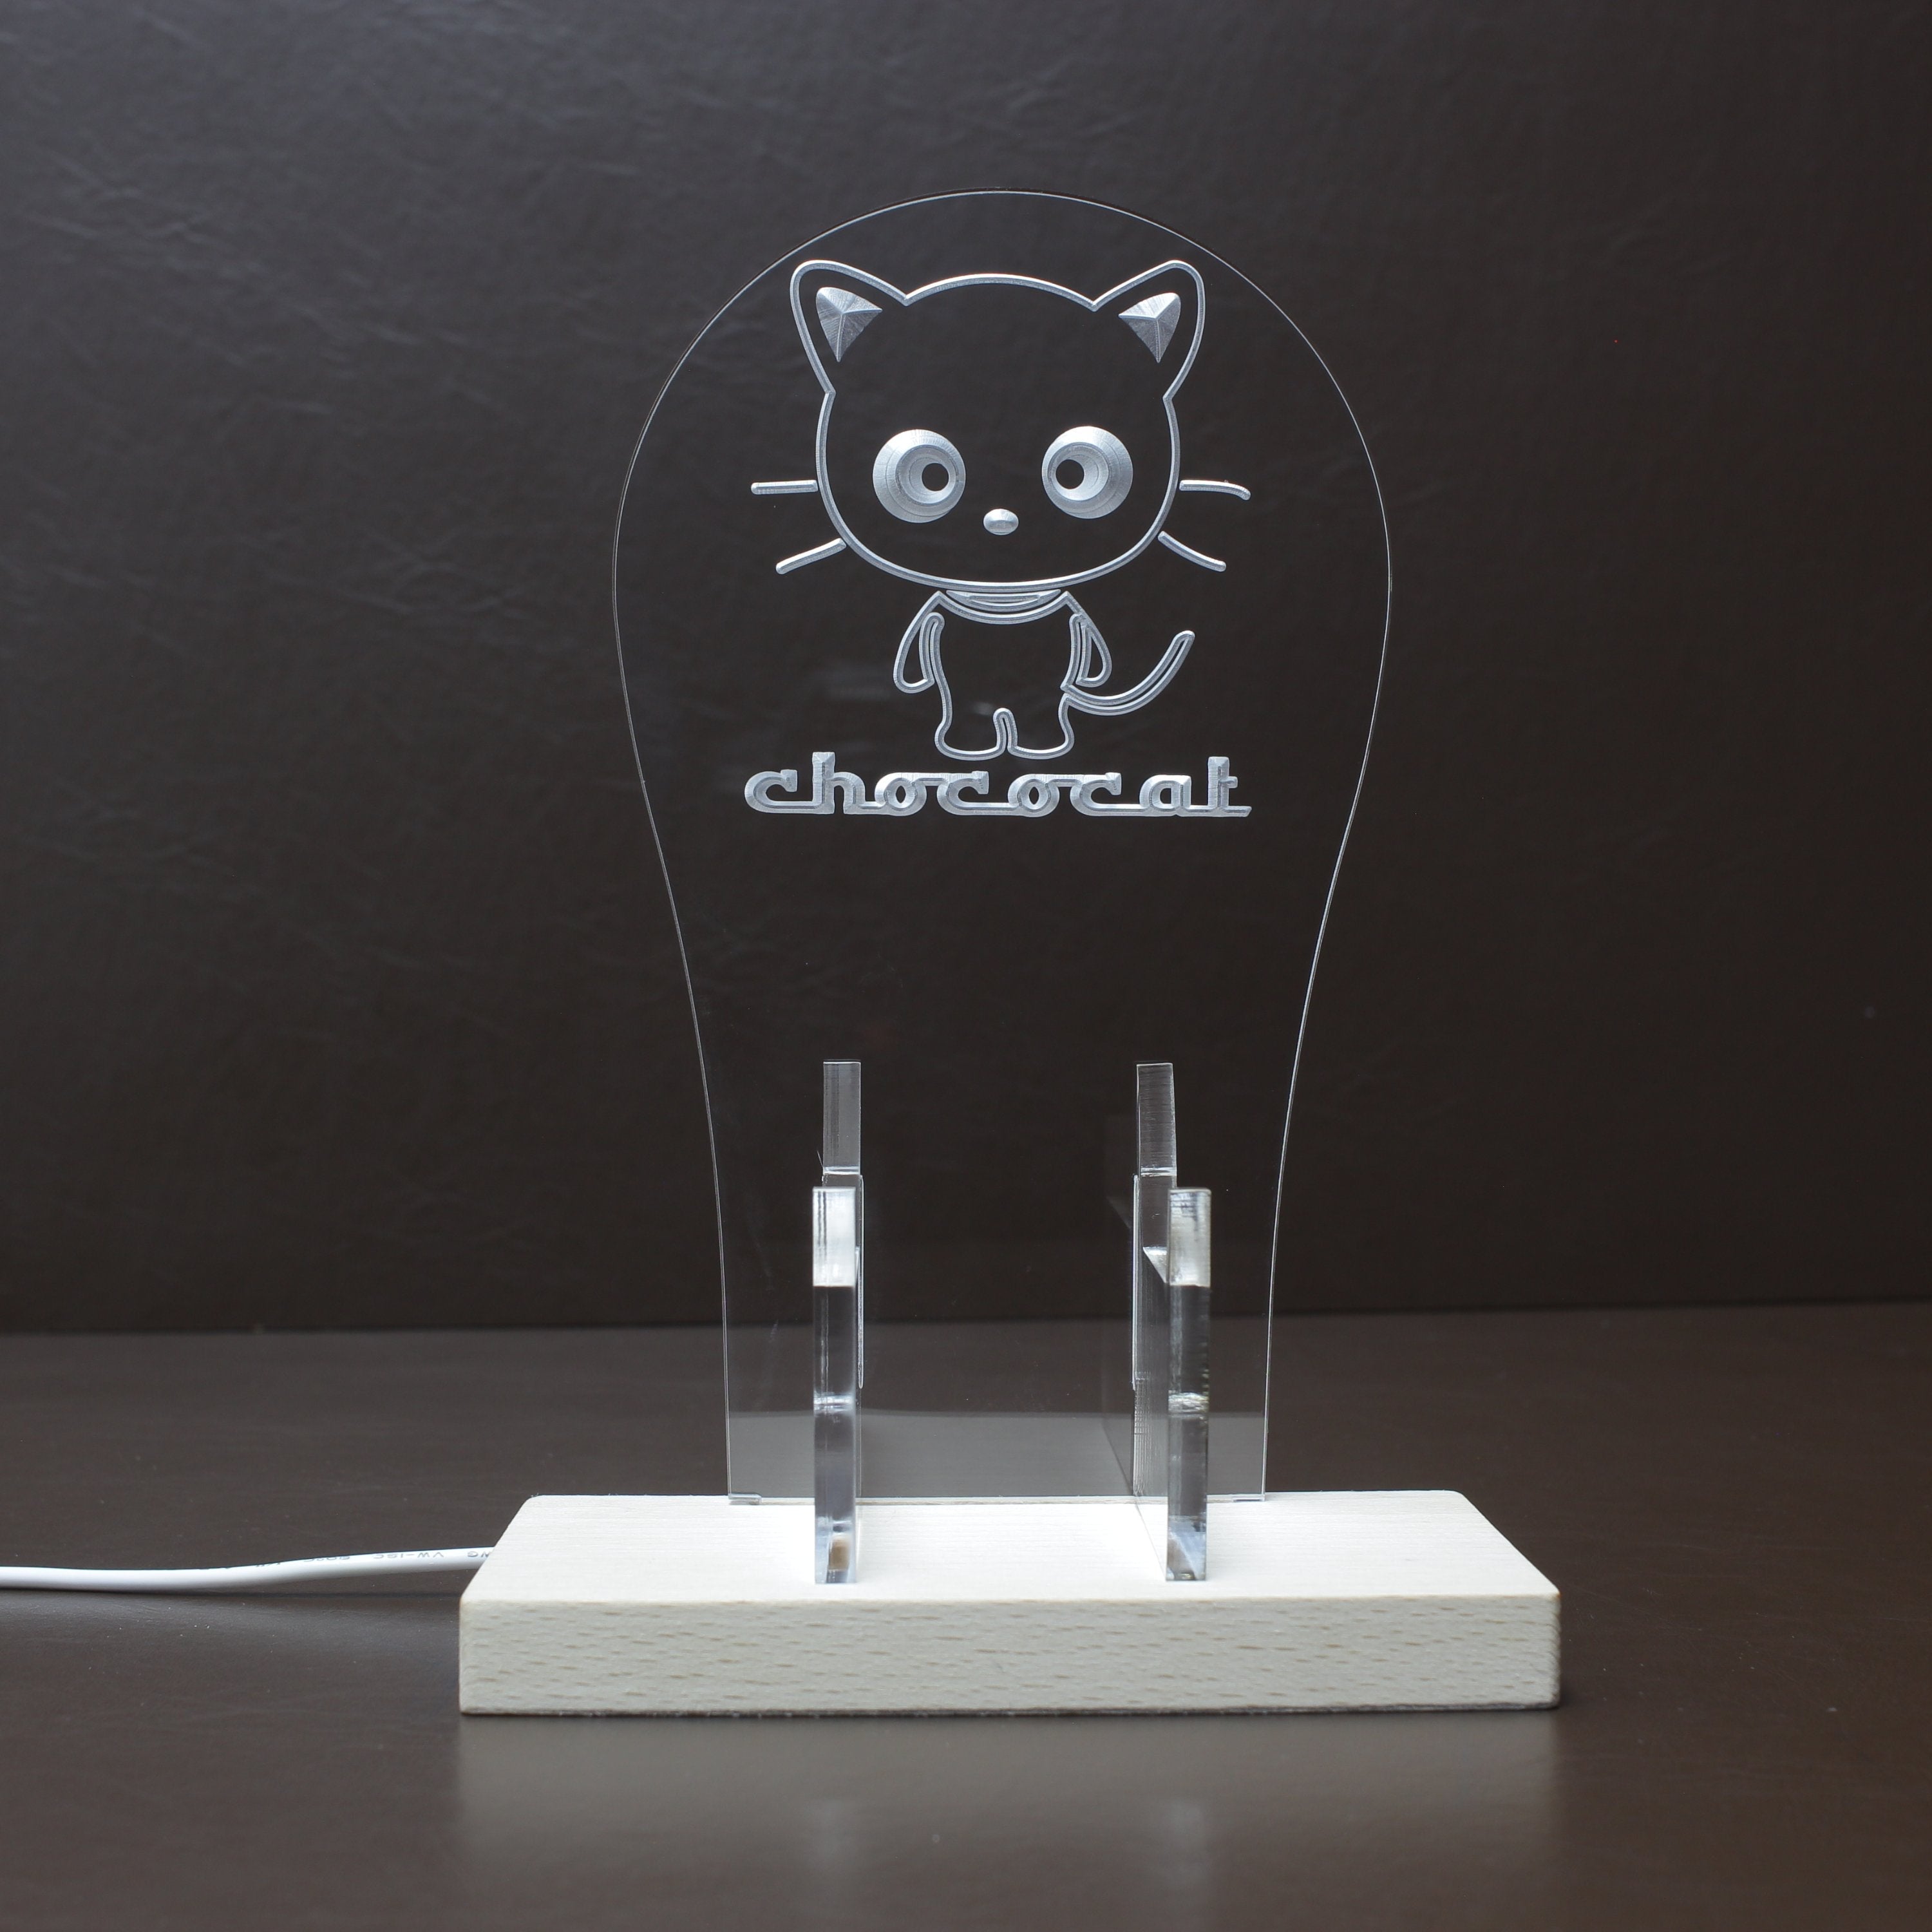 Chococat LED Gaming Headset Controller Stand